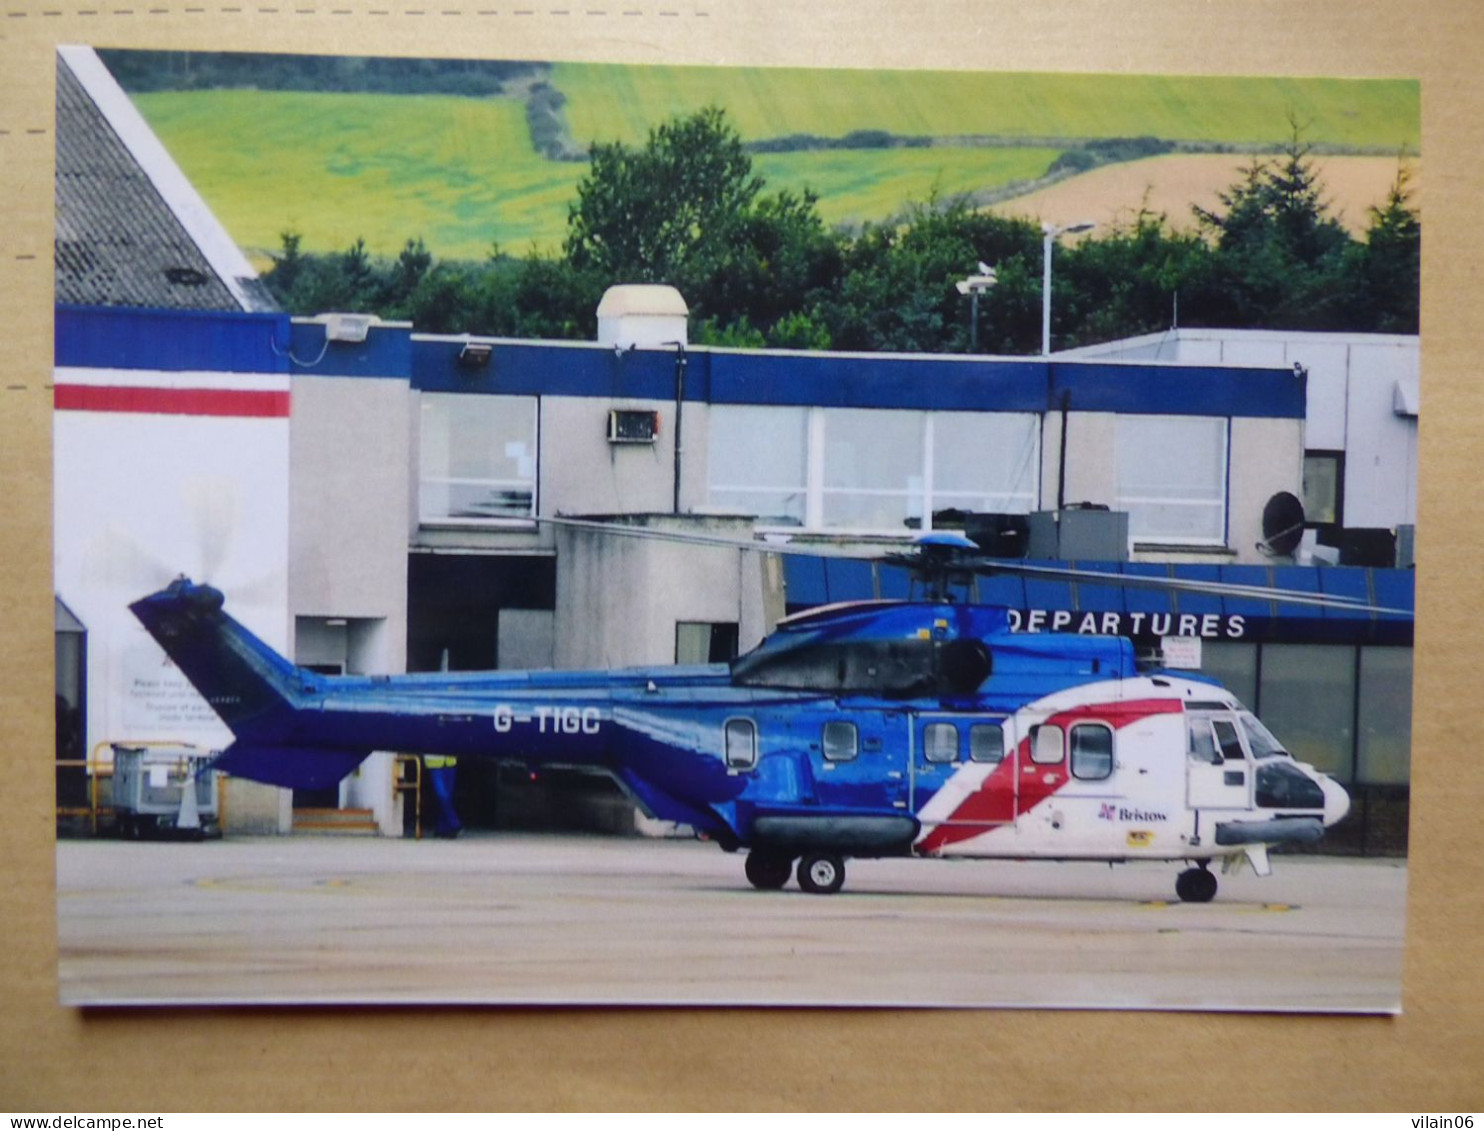 BRISTOW    SUPER PUMA  G-TIGC    ABERDEEN AIRPORT - Helikopters